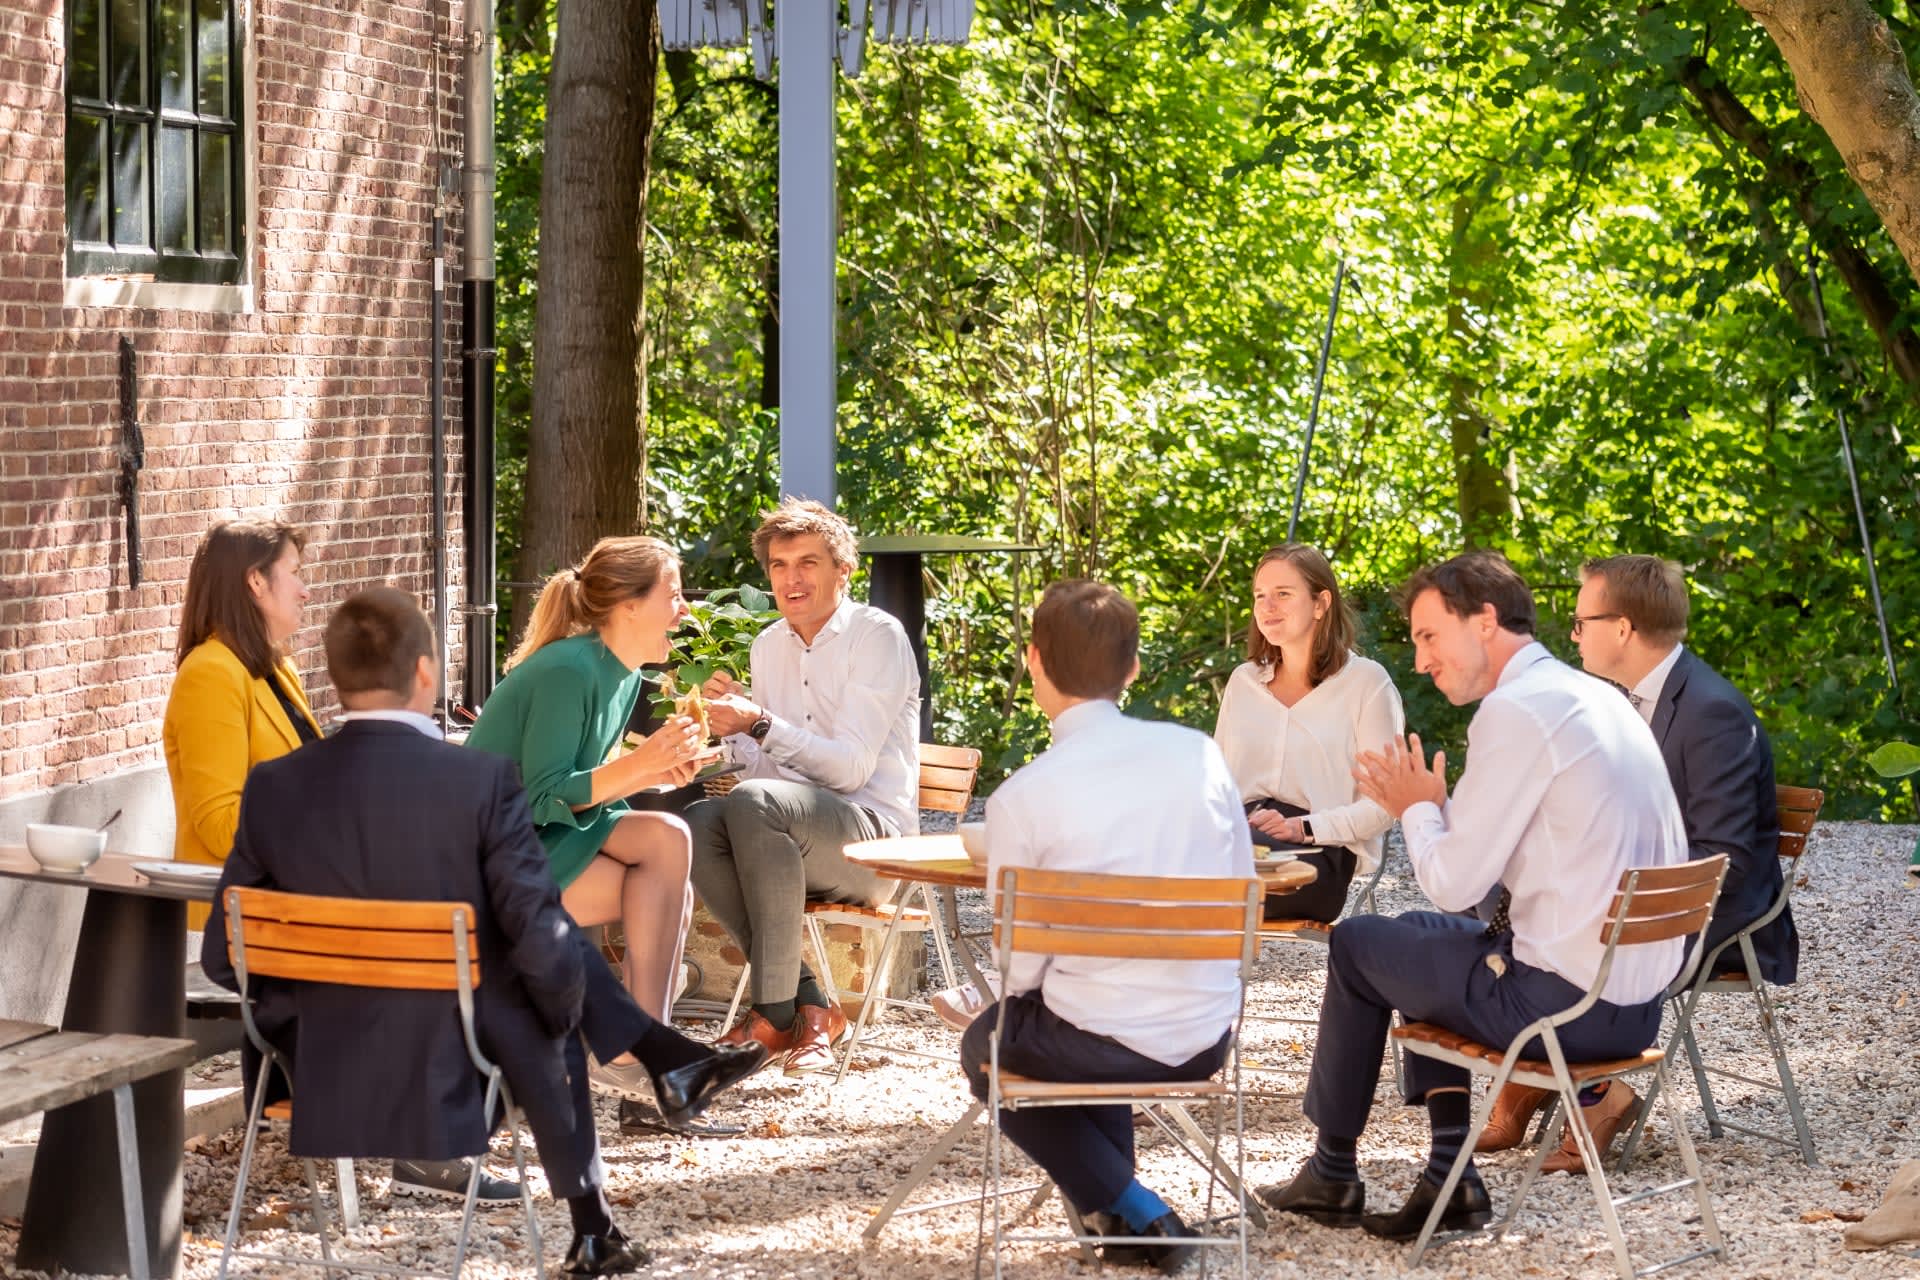 Eight consultants having lunch outside in the garden, talking and laughing with each other. Sitting on chairs in green surroundings.